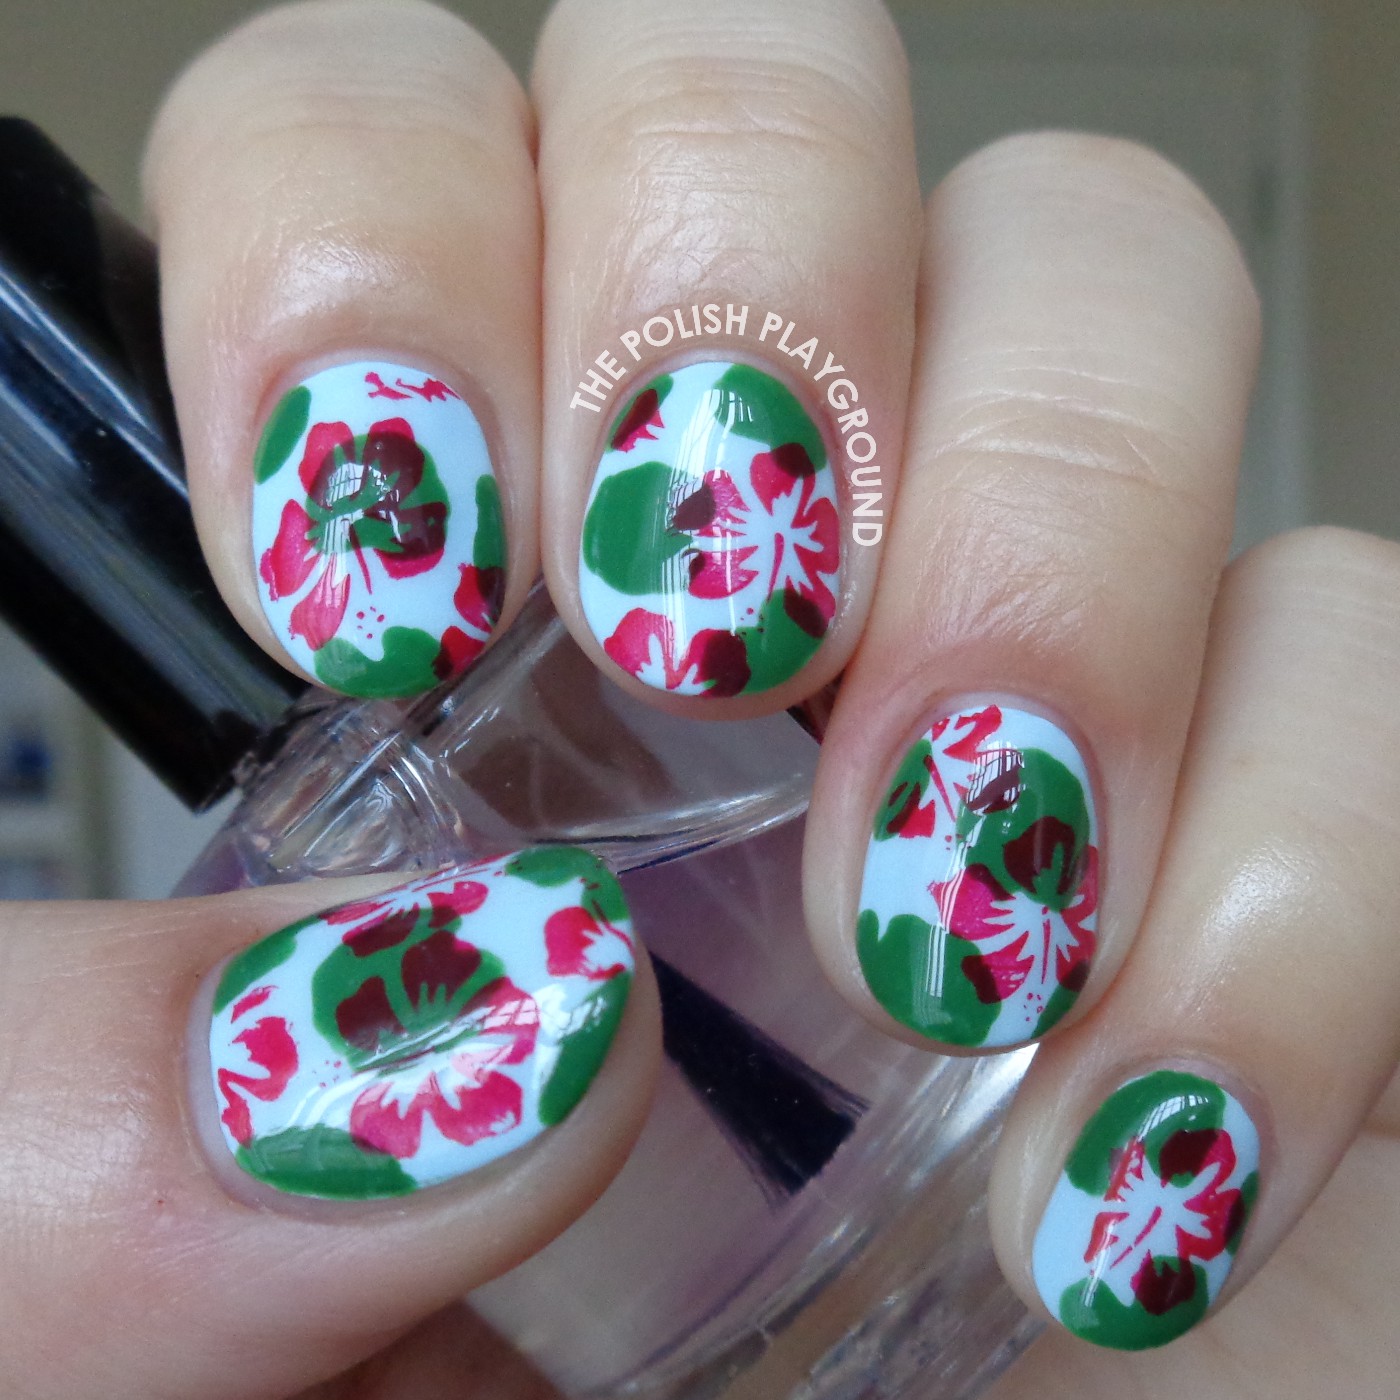 Pond Manicure with Lily Pads and Floral Stamping Nail Art